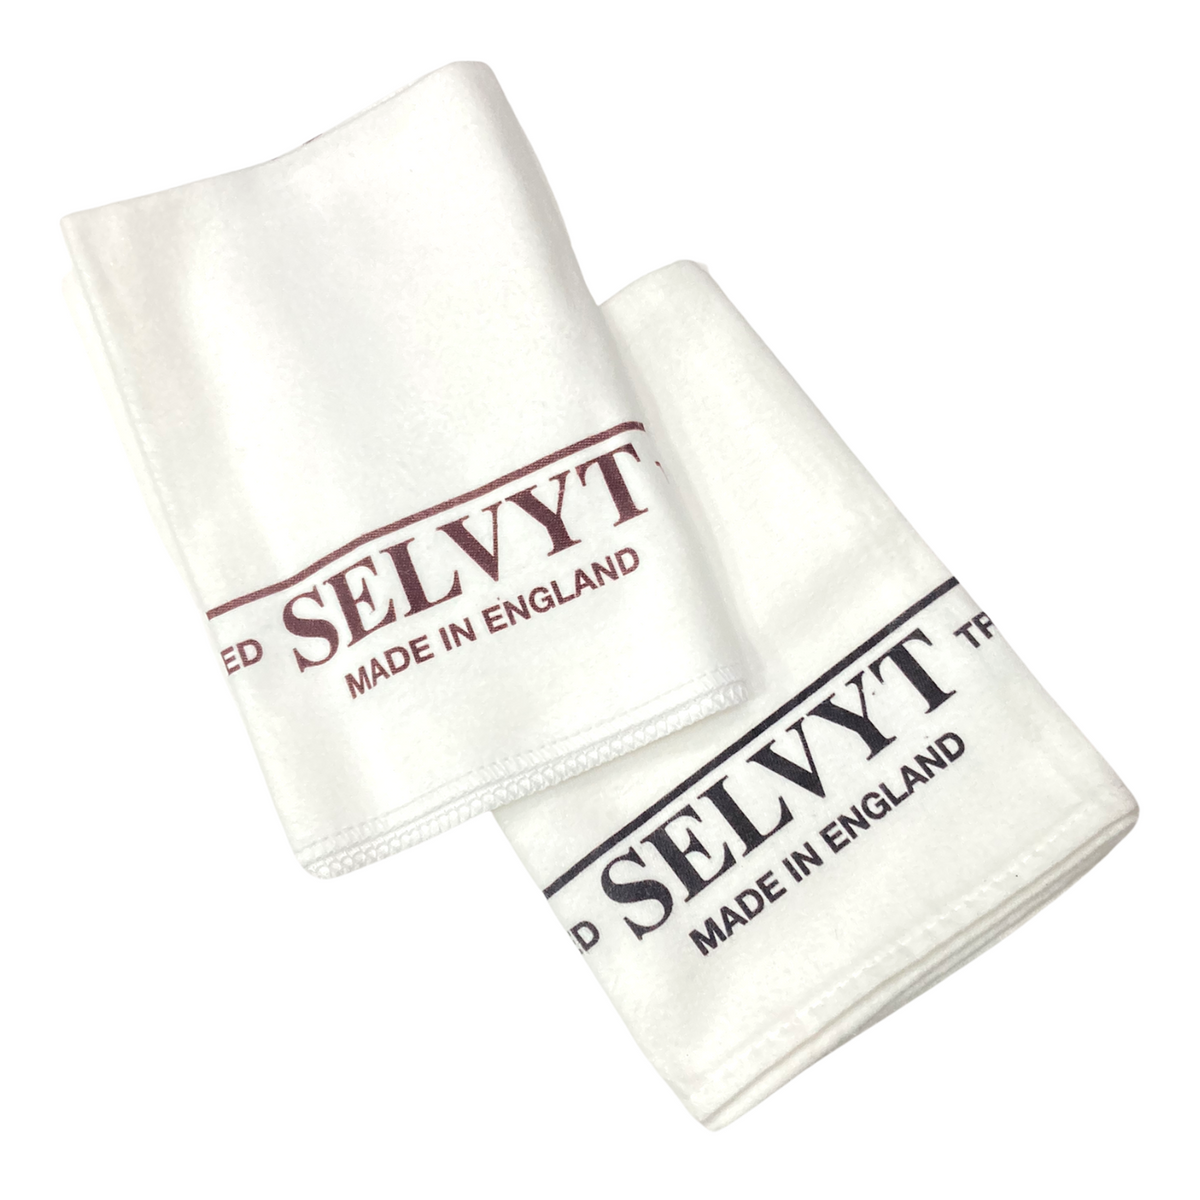 Jewelry and Diamond Polishing and Cleaning Cloth, Selvet Jewelry Care,  Custom Jewelry Cleaning Cloth, Personalized Jewelry Cleaning Cloth 